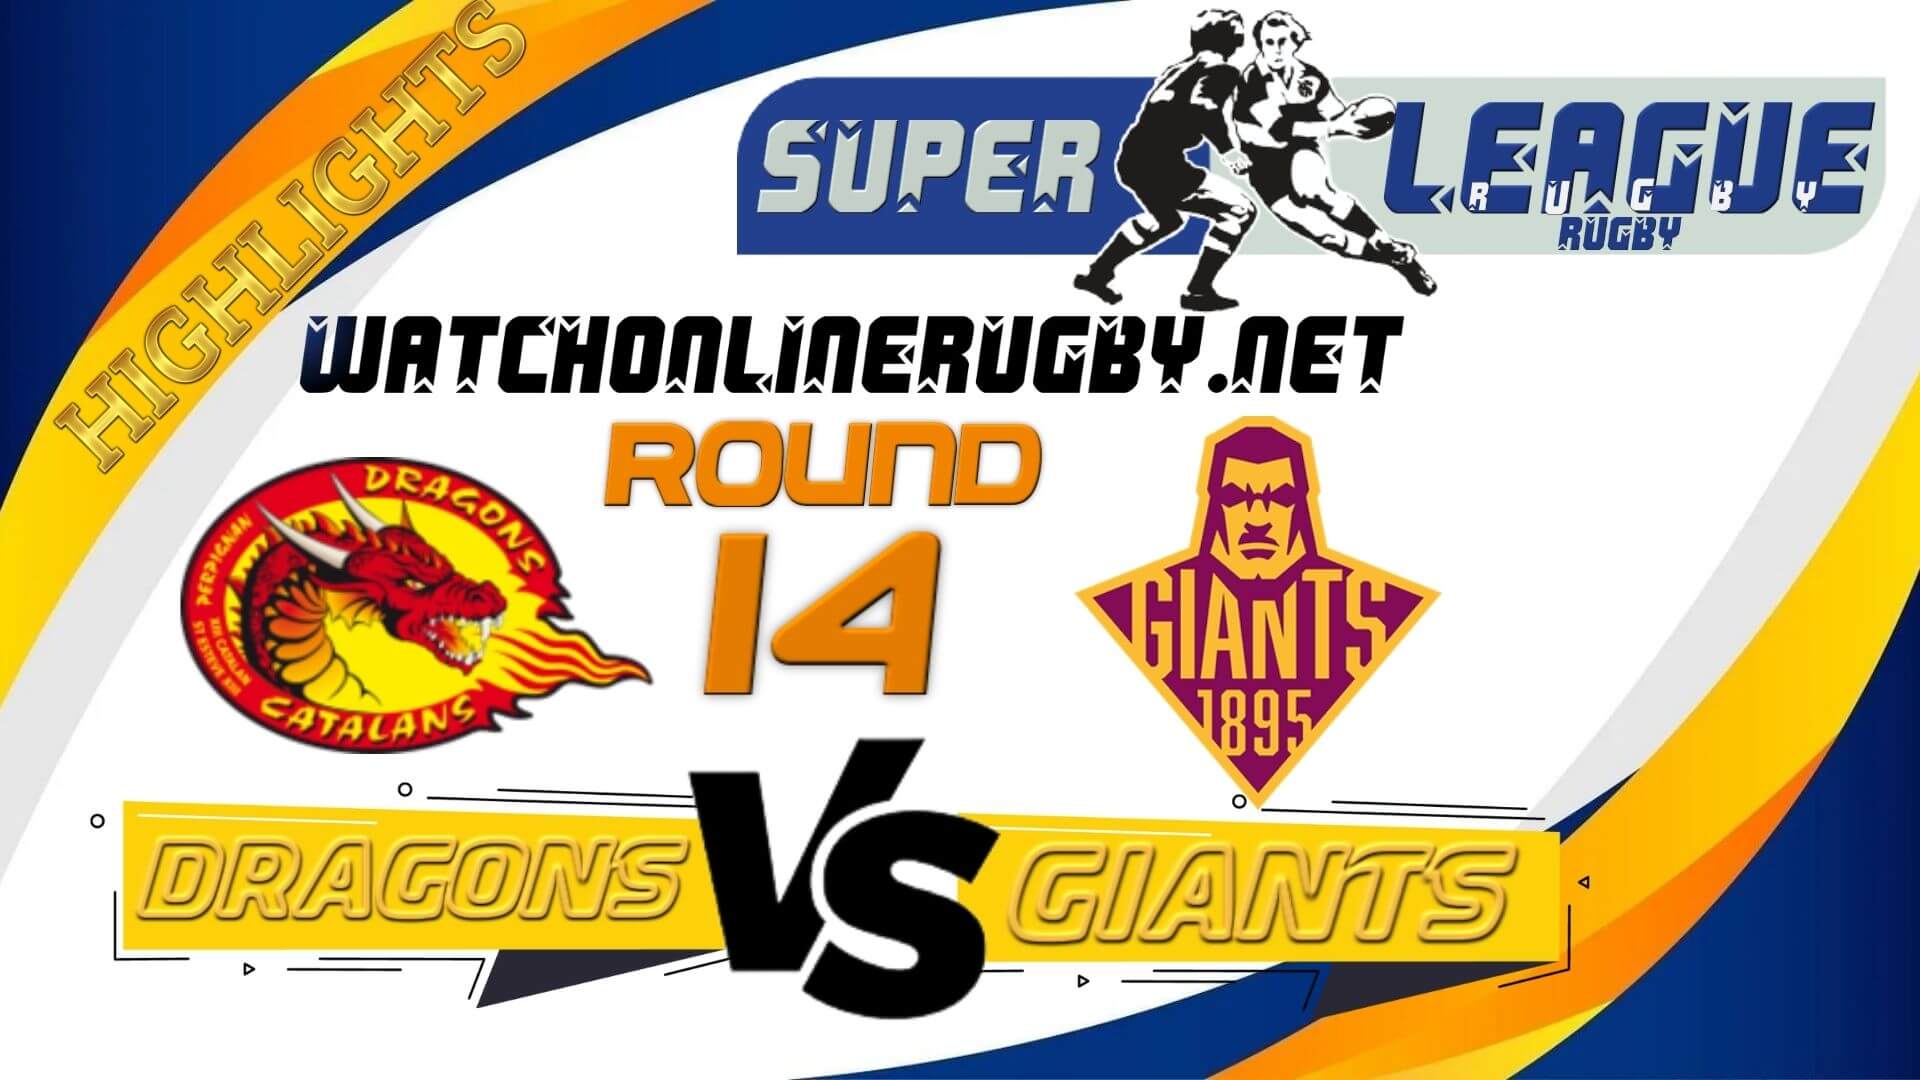 Catalans Dragons Vs Huddersfield Giants Super League Rugby 2022 RD 14